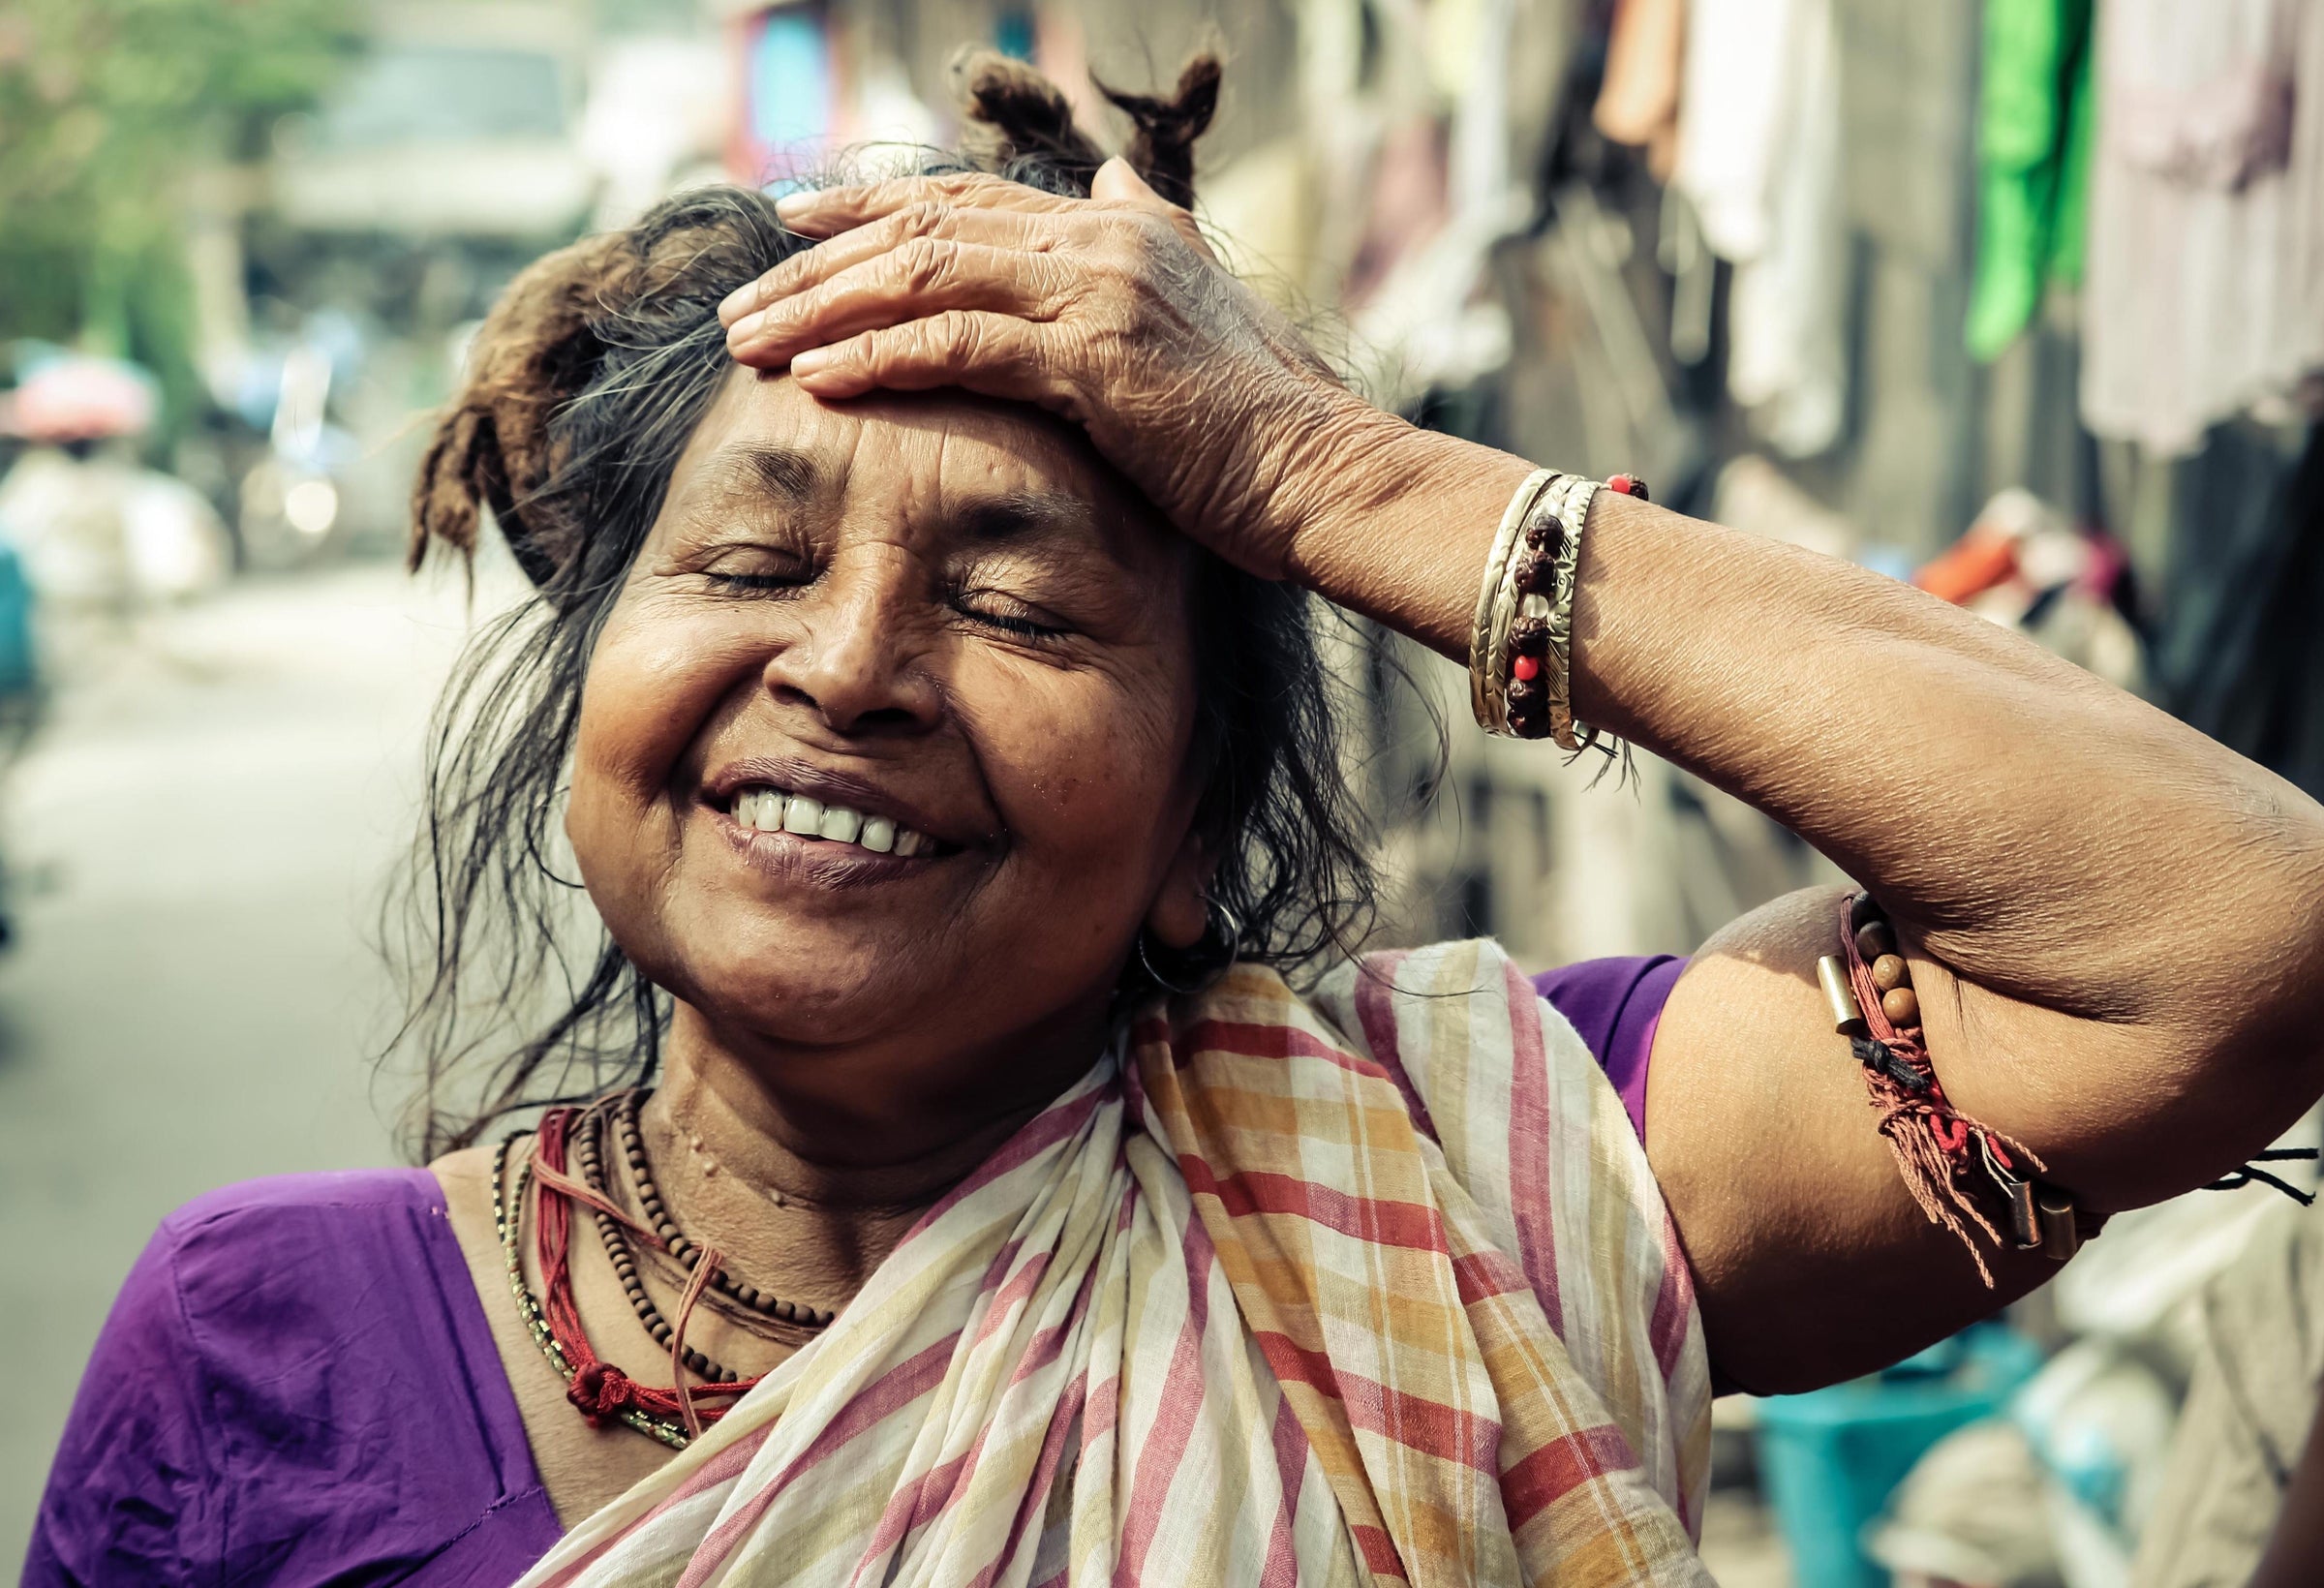 An Indian woman wearing a sari and beads around her arms and neck standing in the streets of an India city with her hand on her forehead while smiling. 